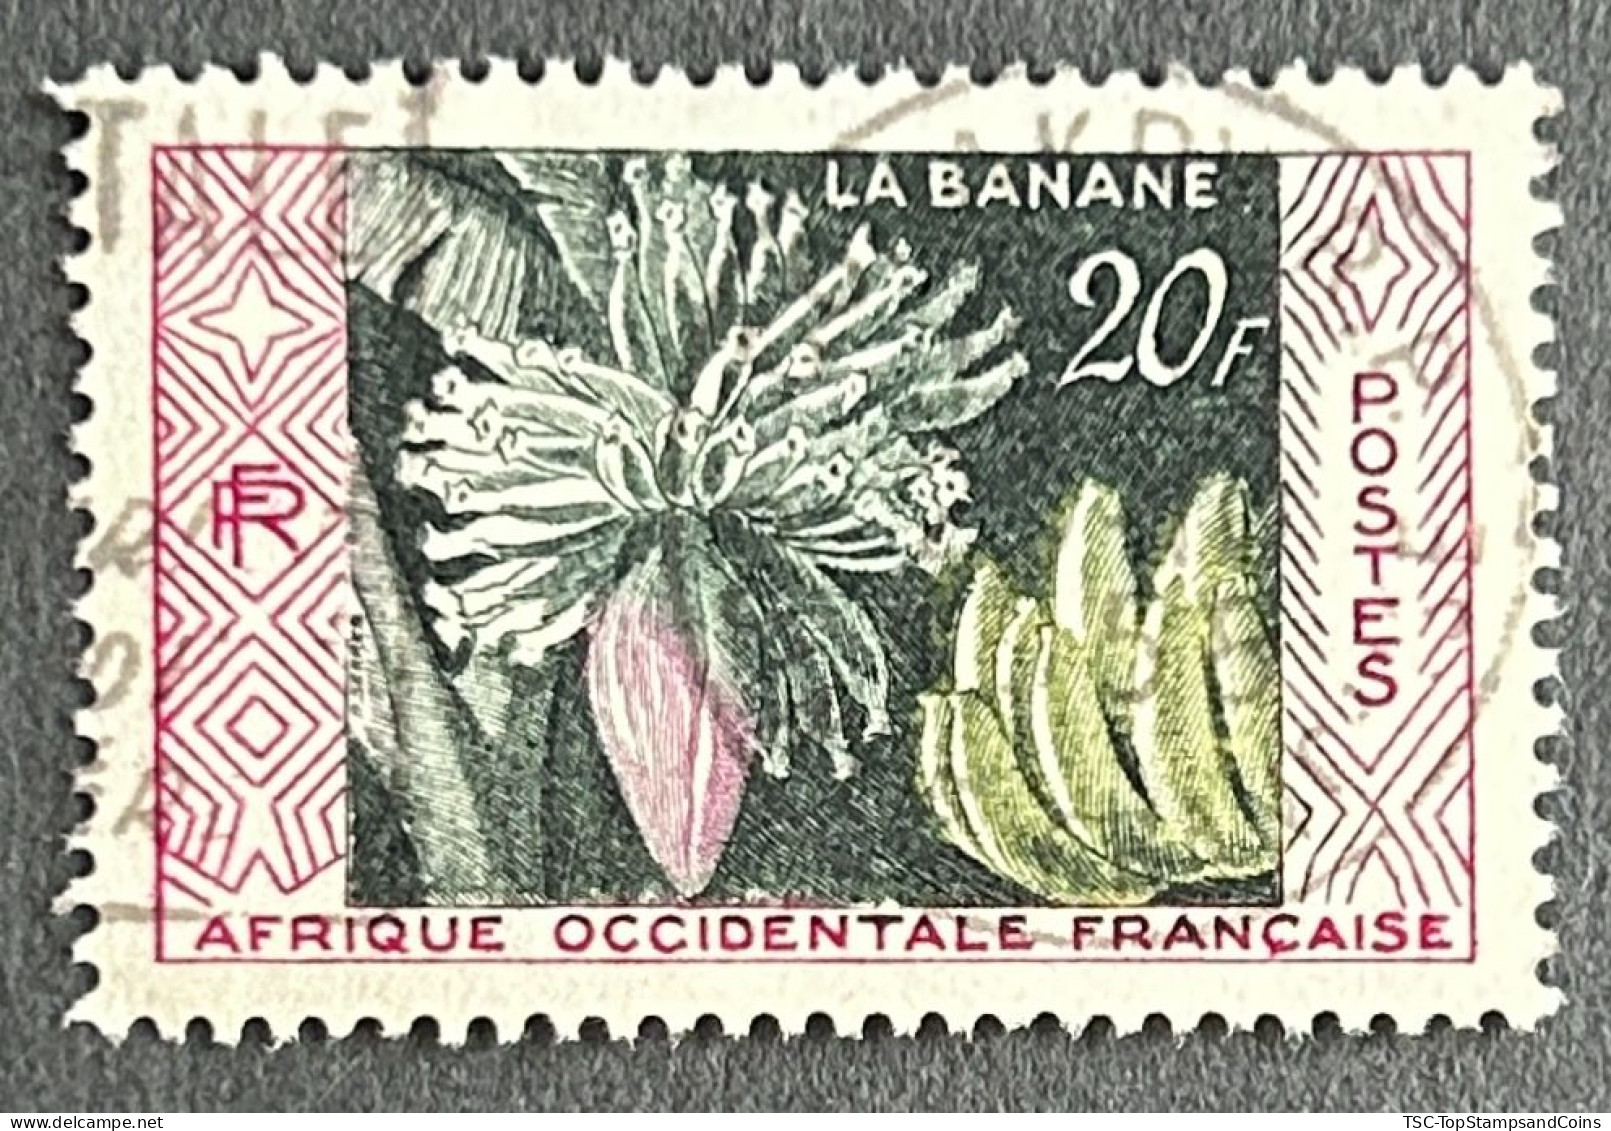 FRAWA0067U1 - Native Products - Banana Production - 20 F Used Stamp - AOF - 1958 - Used Stamps